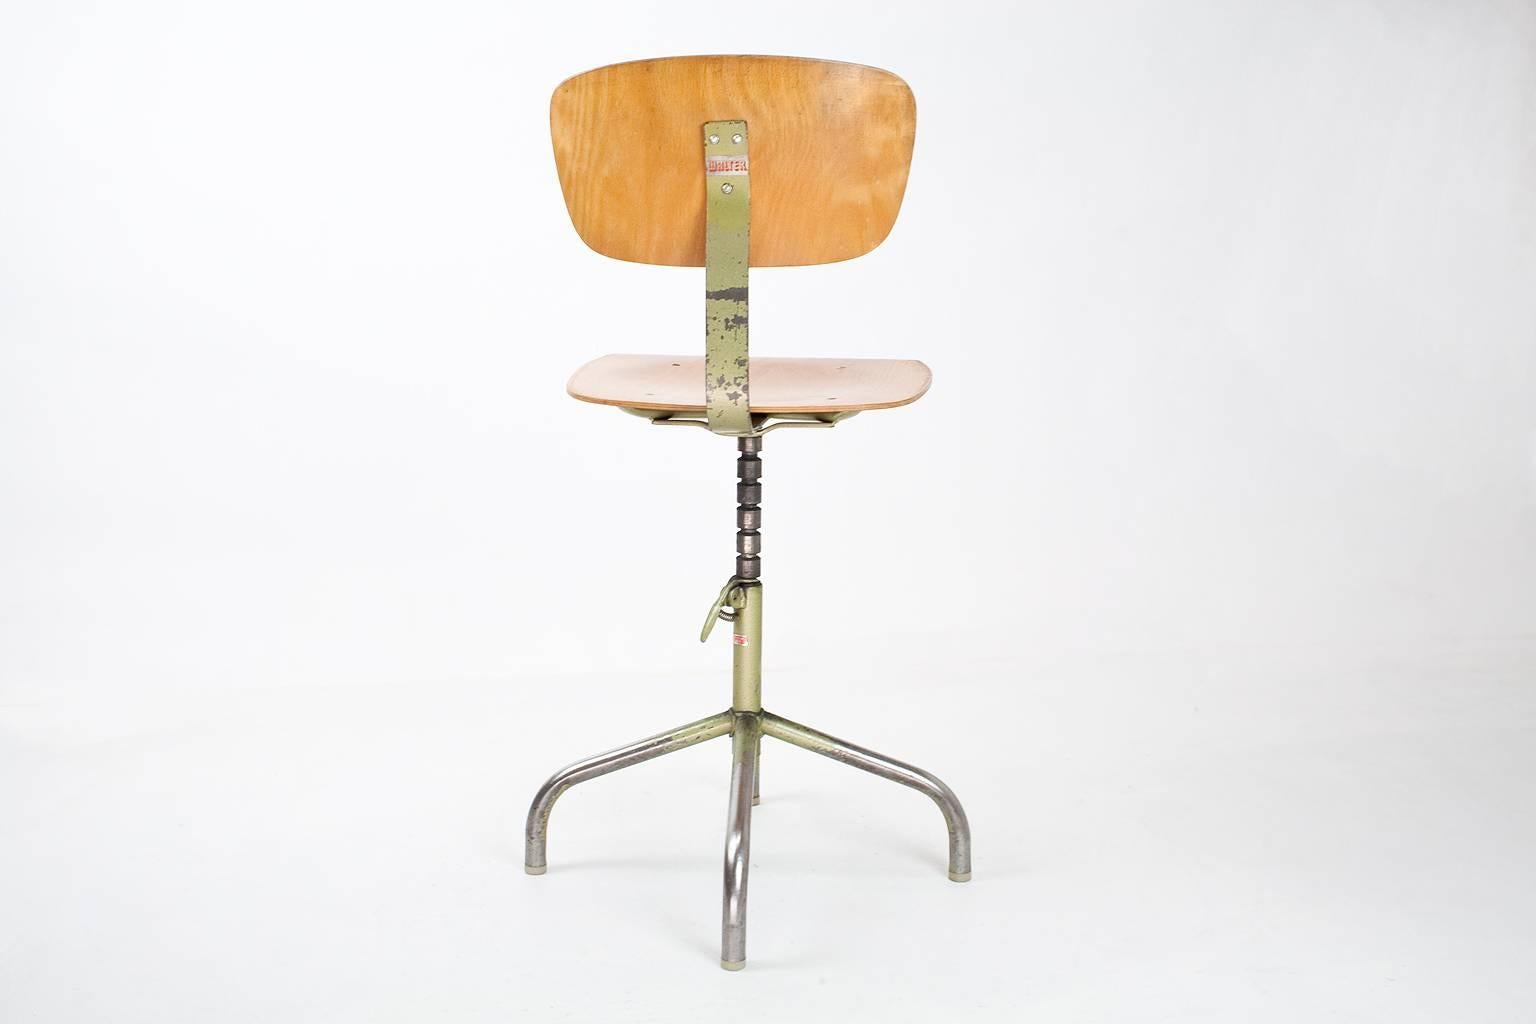 Set of eight Industrial 1960s swivel drawing board / drafting chair by Walter (DE), which can also be used as normal (desk or dining) chair, since the height is adjustable with an easy lever in steps of 3 cm.

Sold as set of eight, all in the same